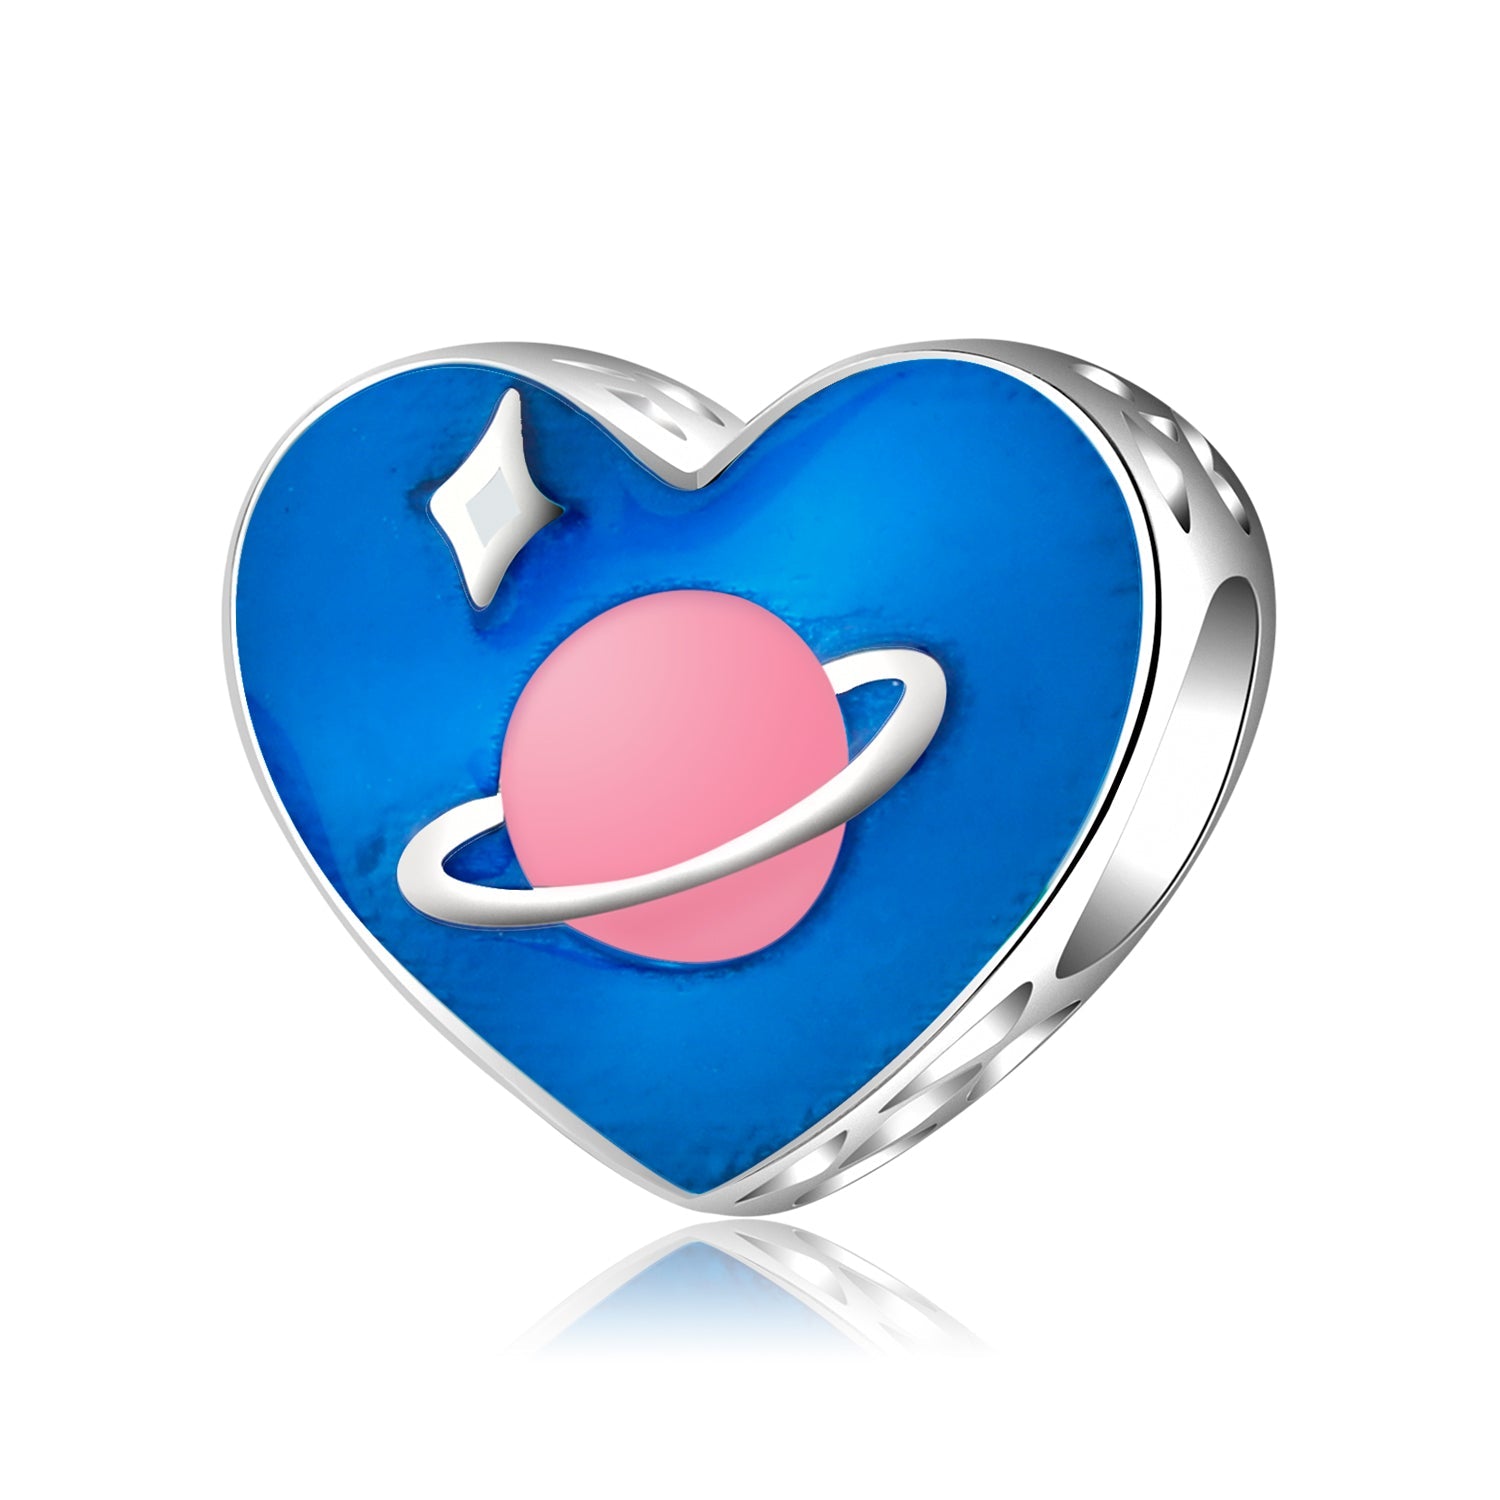 Blue heart with pink planet